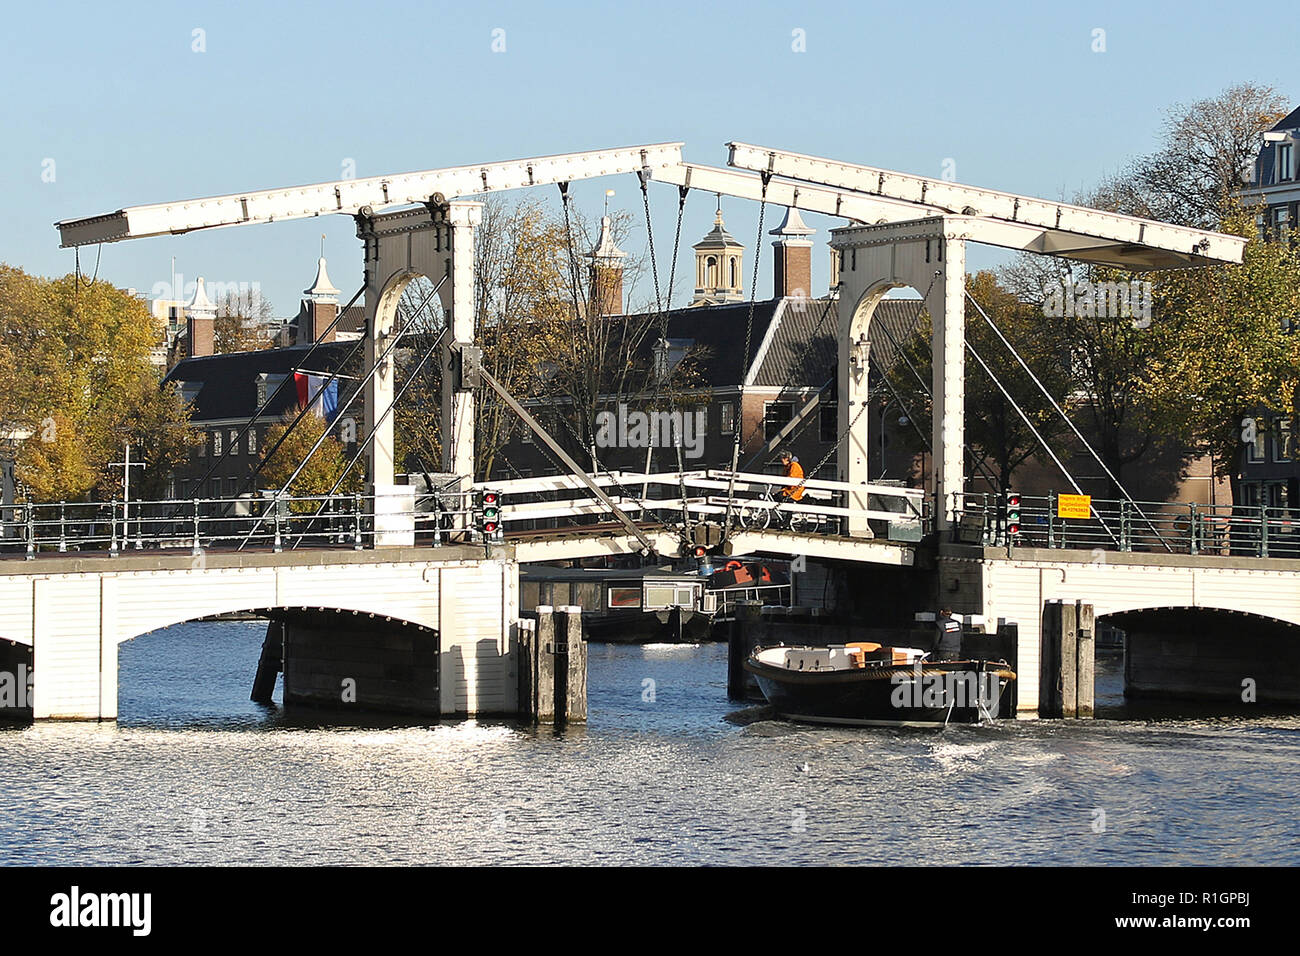 The Magere Brug (English: Skinny Bridge) is a bridge over the river Amstel in Amsterdam, Netherlands. It connects the banks of the river at Kerkstraat, between the Keizersgracht and Prinsengracht. Stock Photo